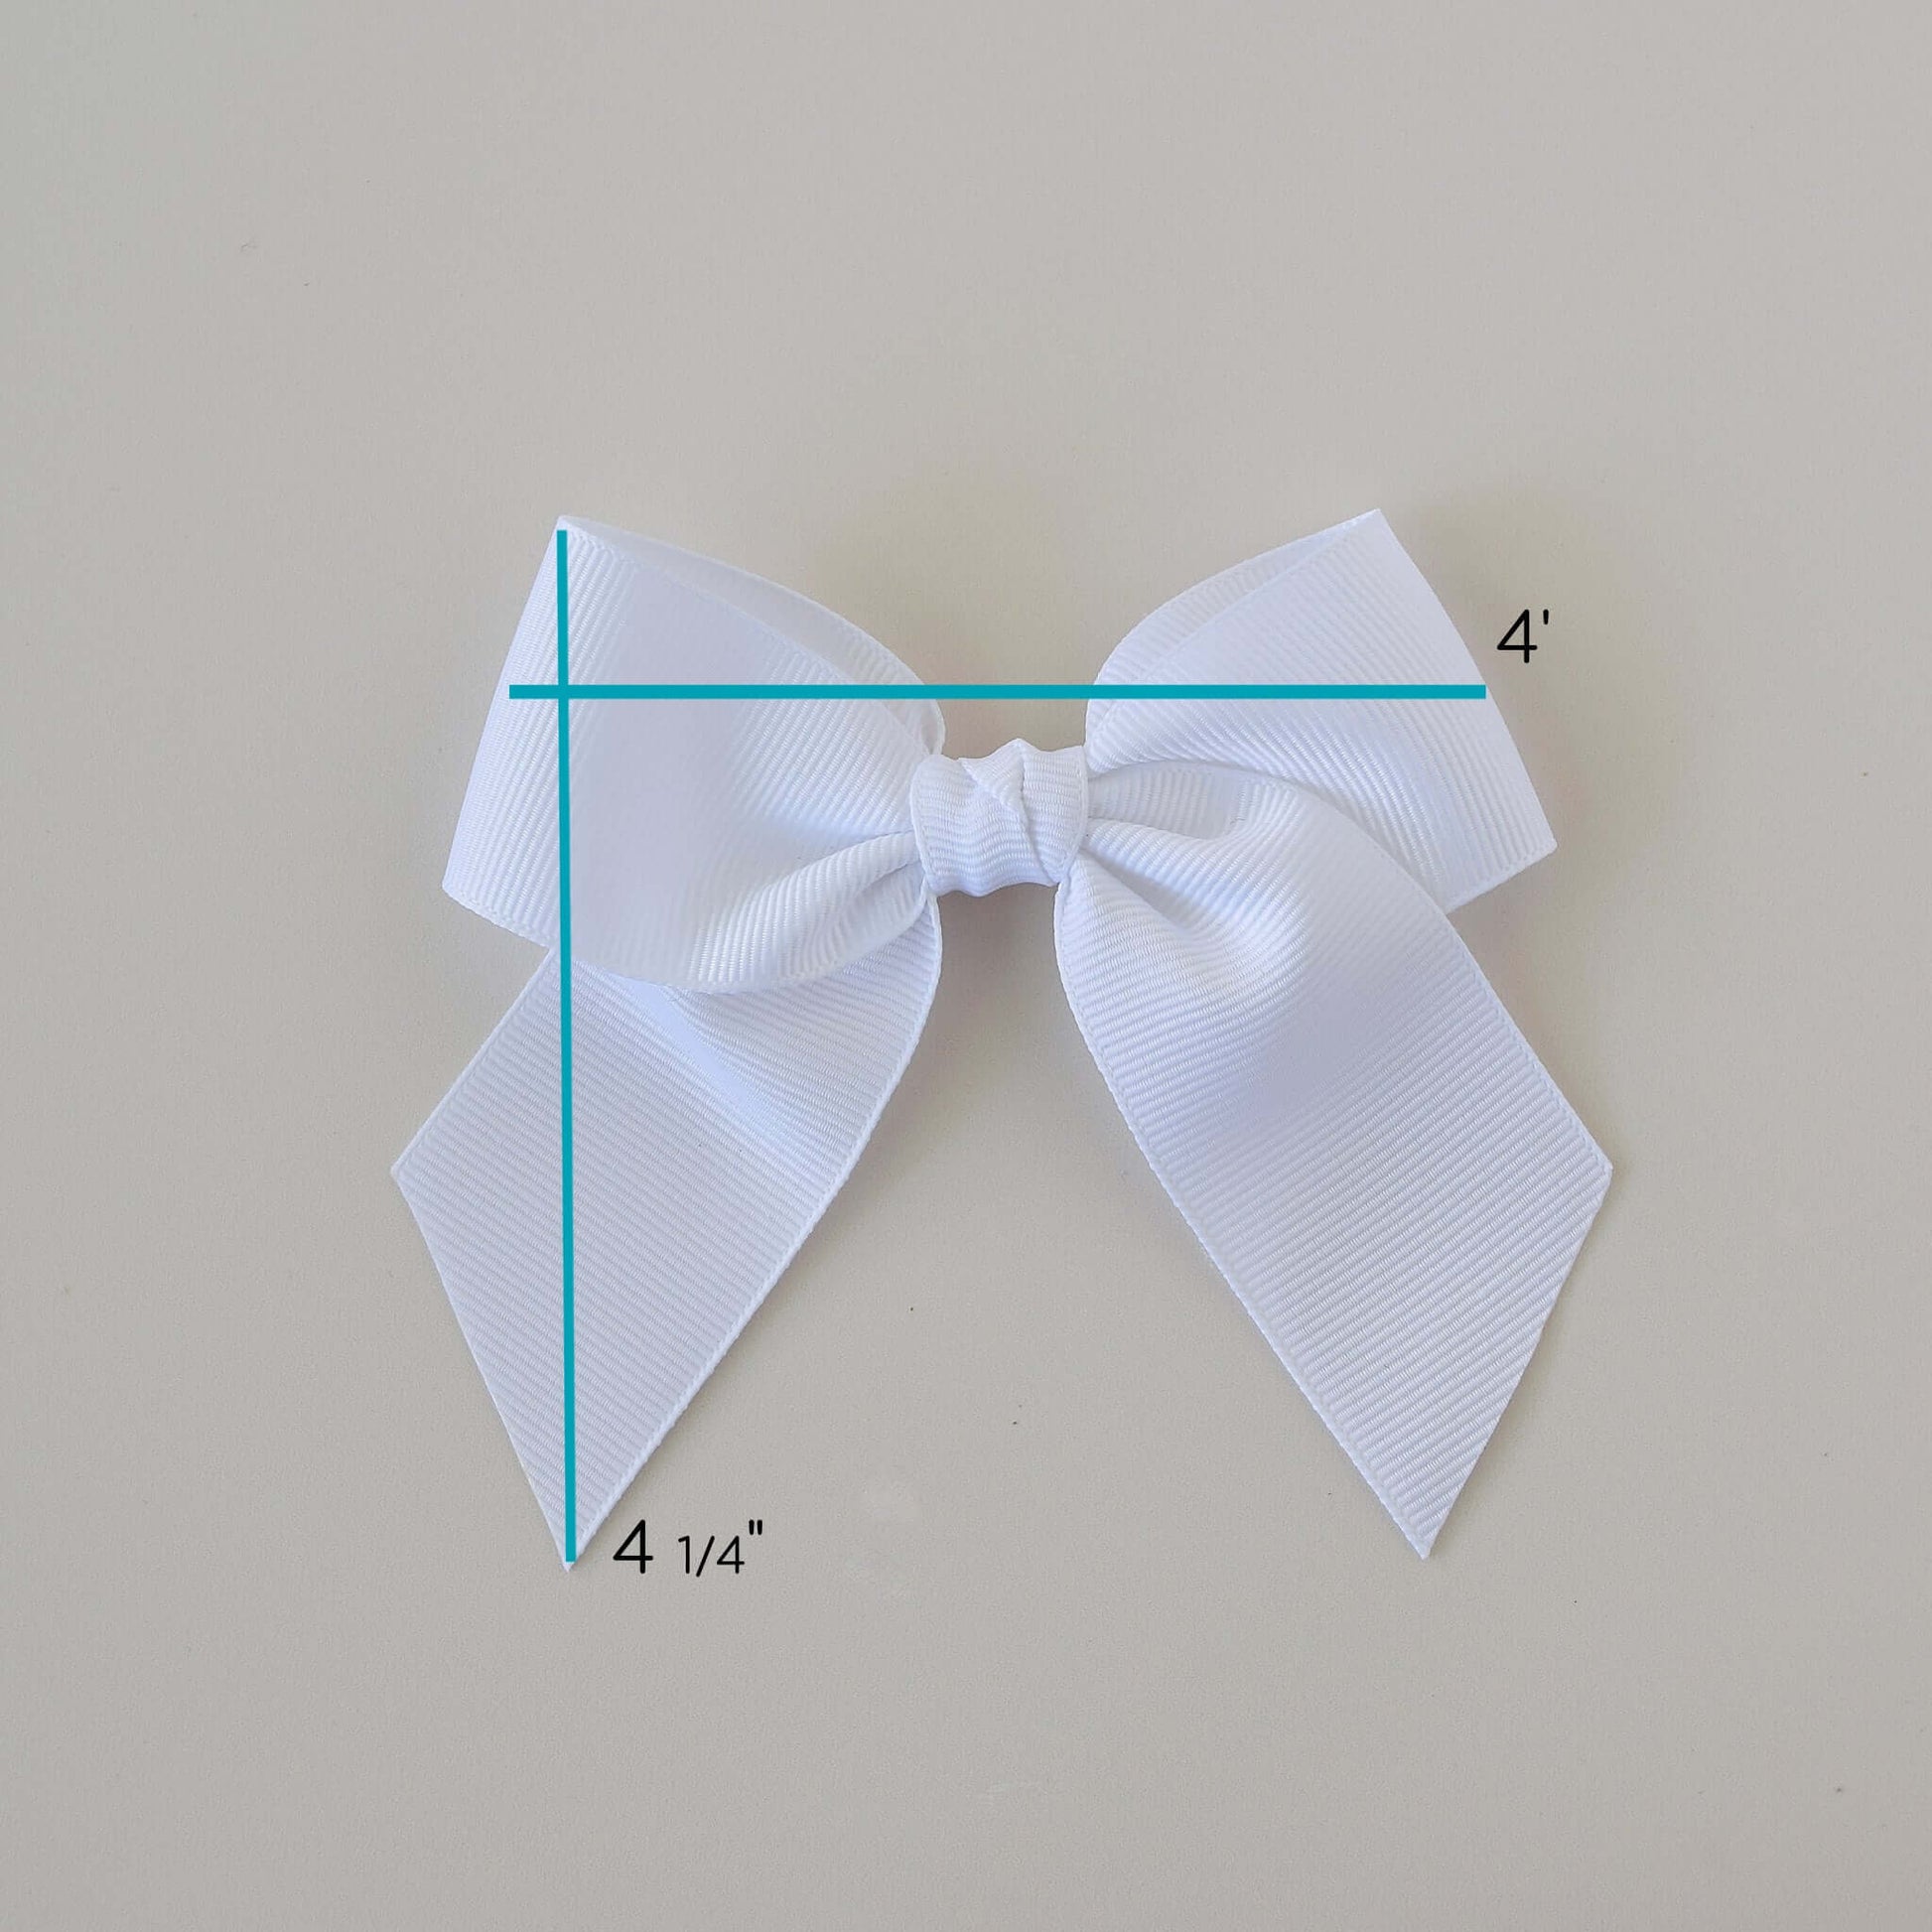 White 4-inch grosgrain sailor bow for toddlers and girls, shown with measurement details, perfect hair accessory in neutral tones.